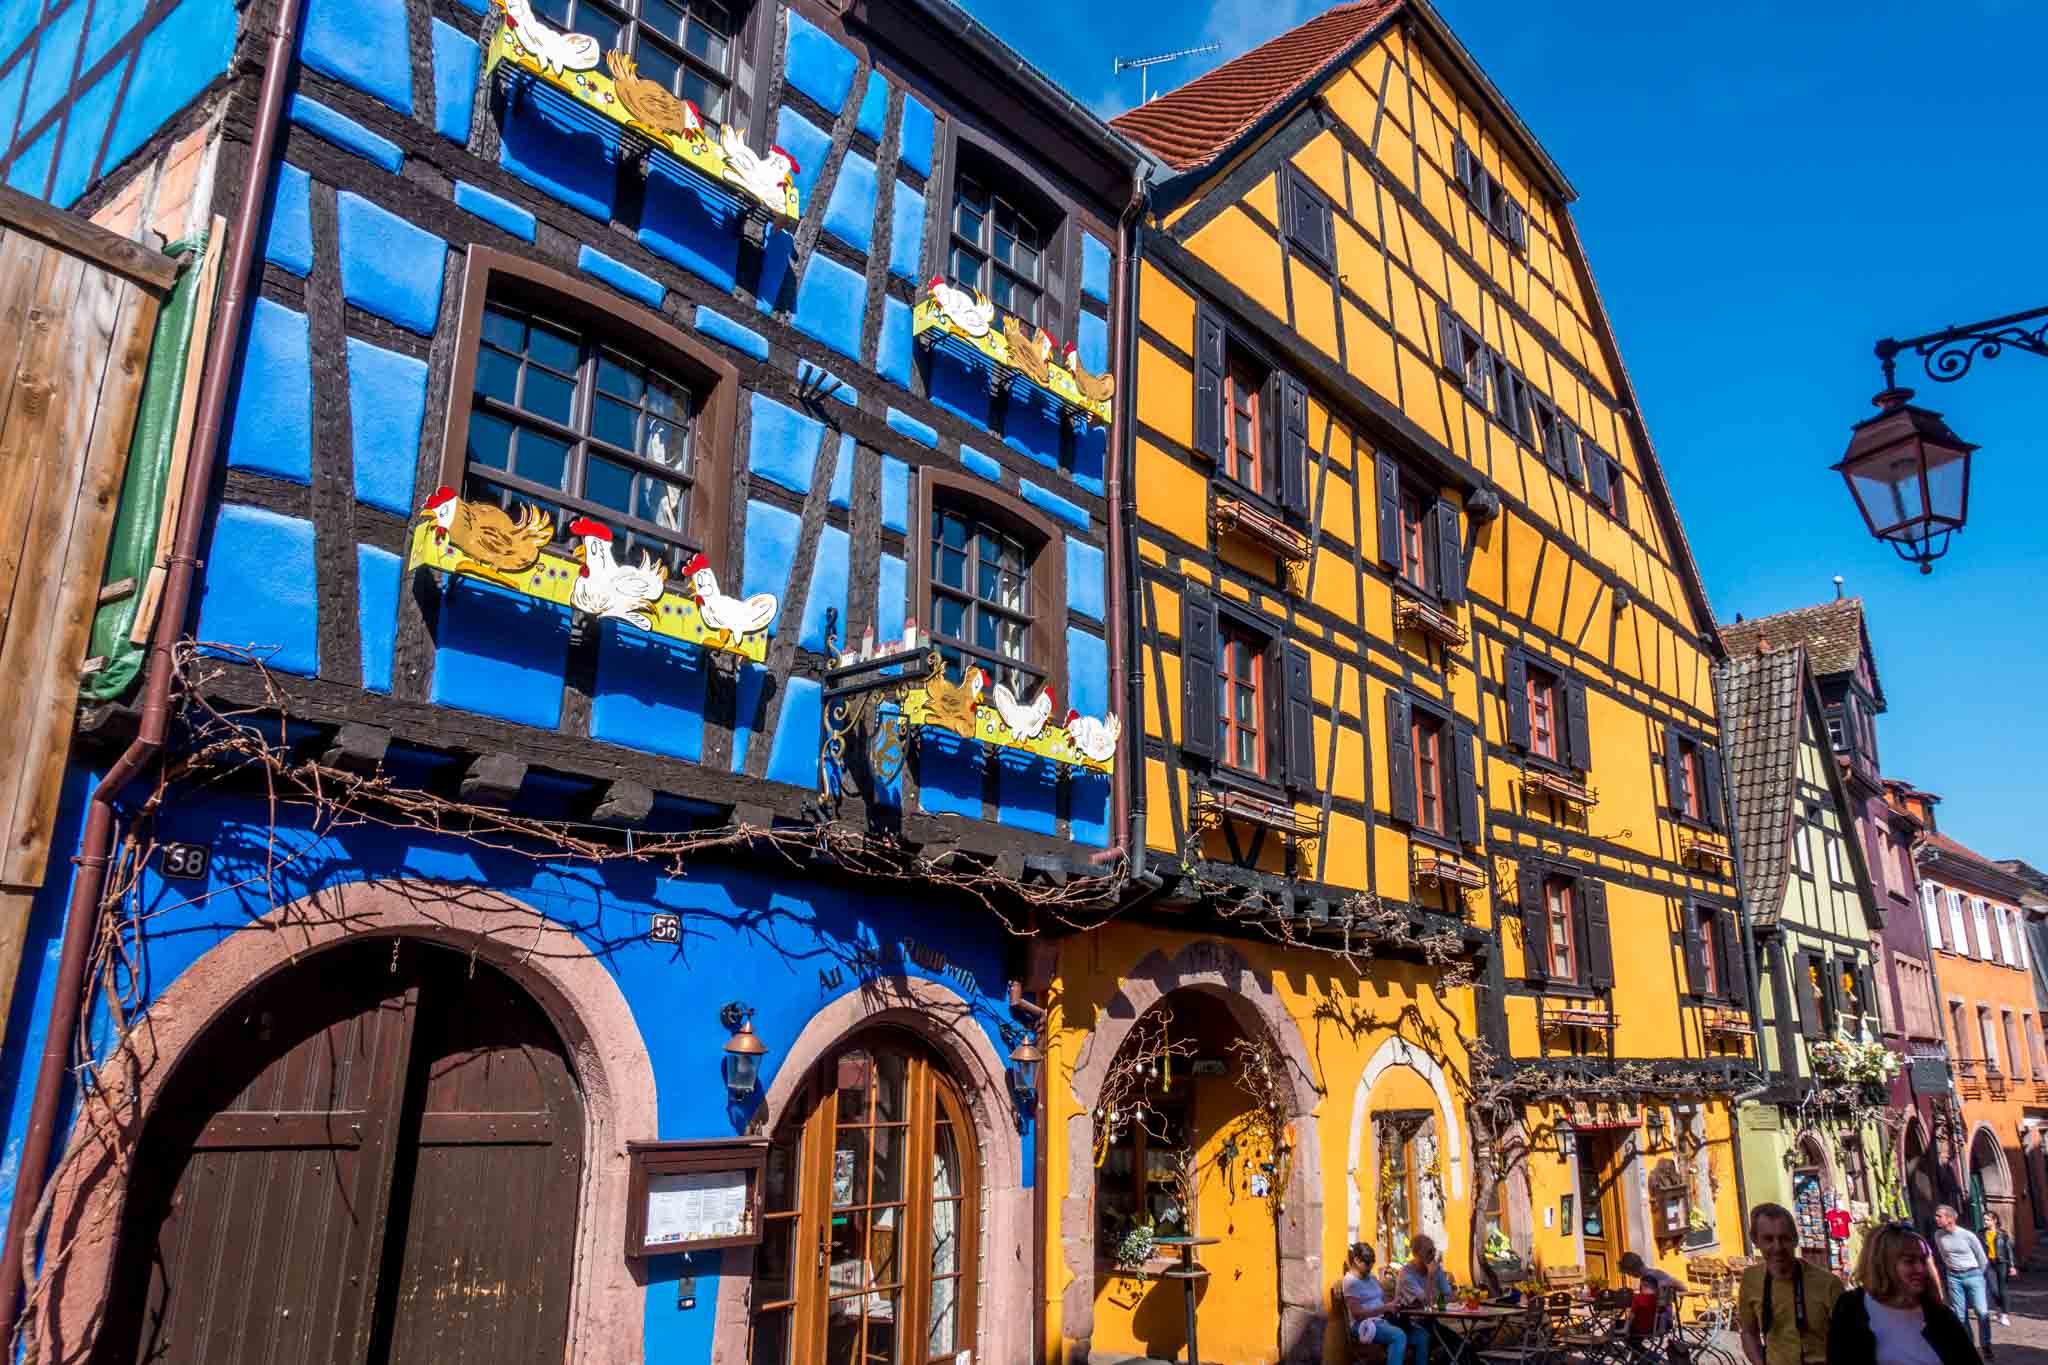 Blue and yellow half-timbered buildings line the streets in Riquewihr, France